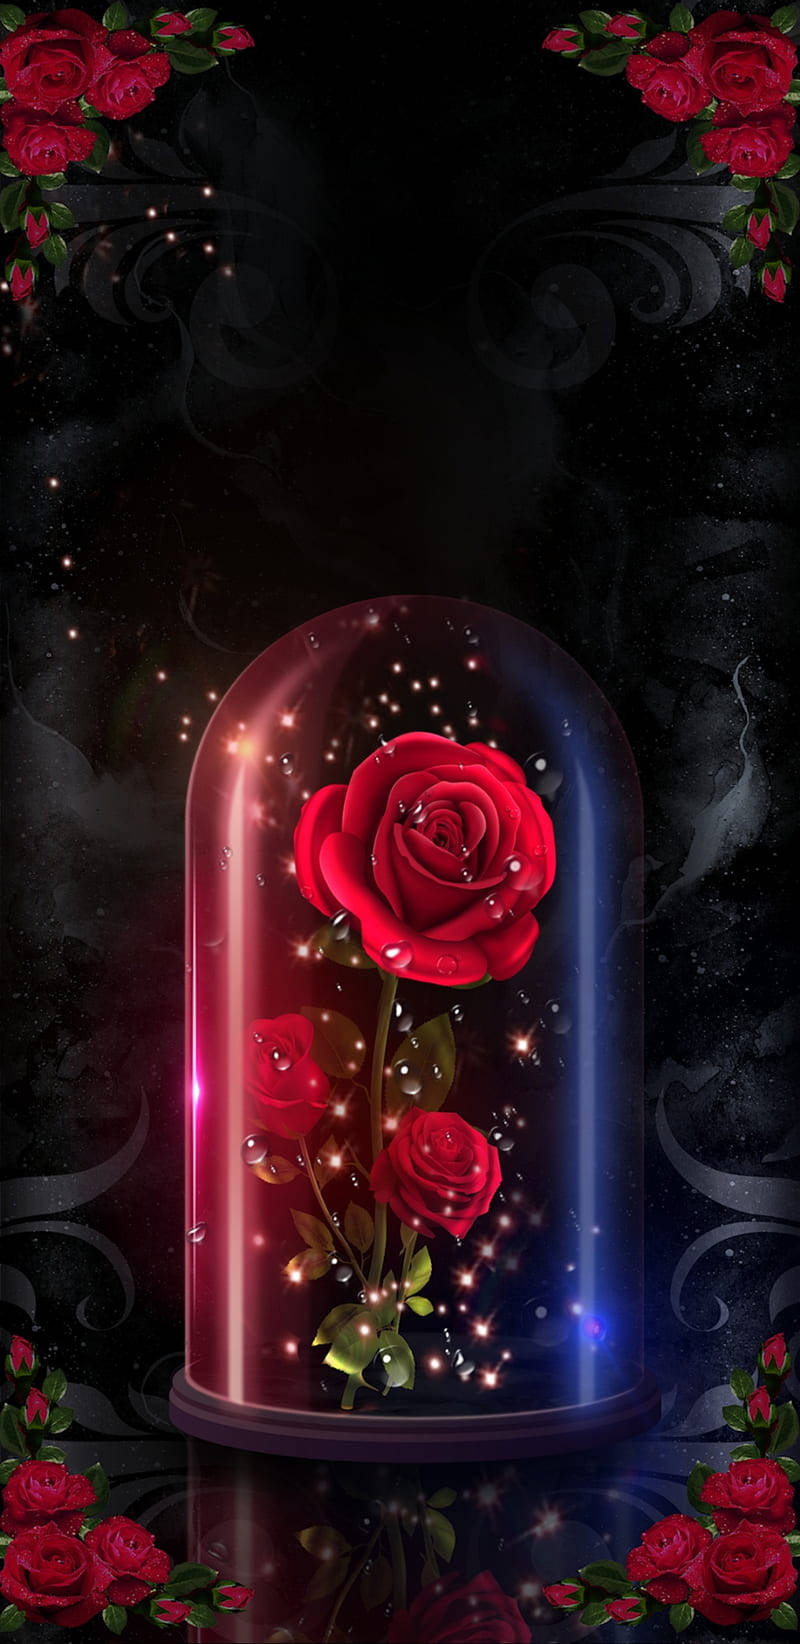 Romantic Rose Inside Glass Container Wallpaper